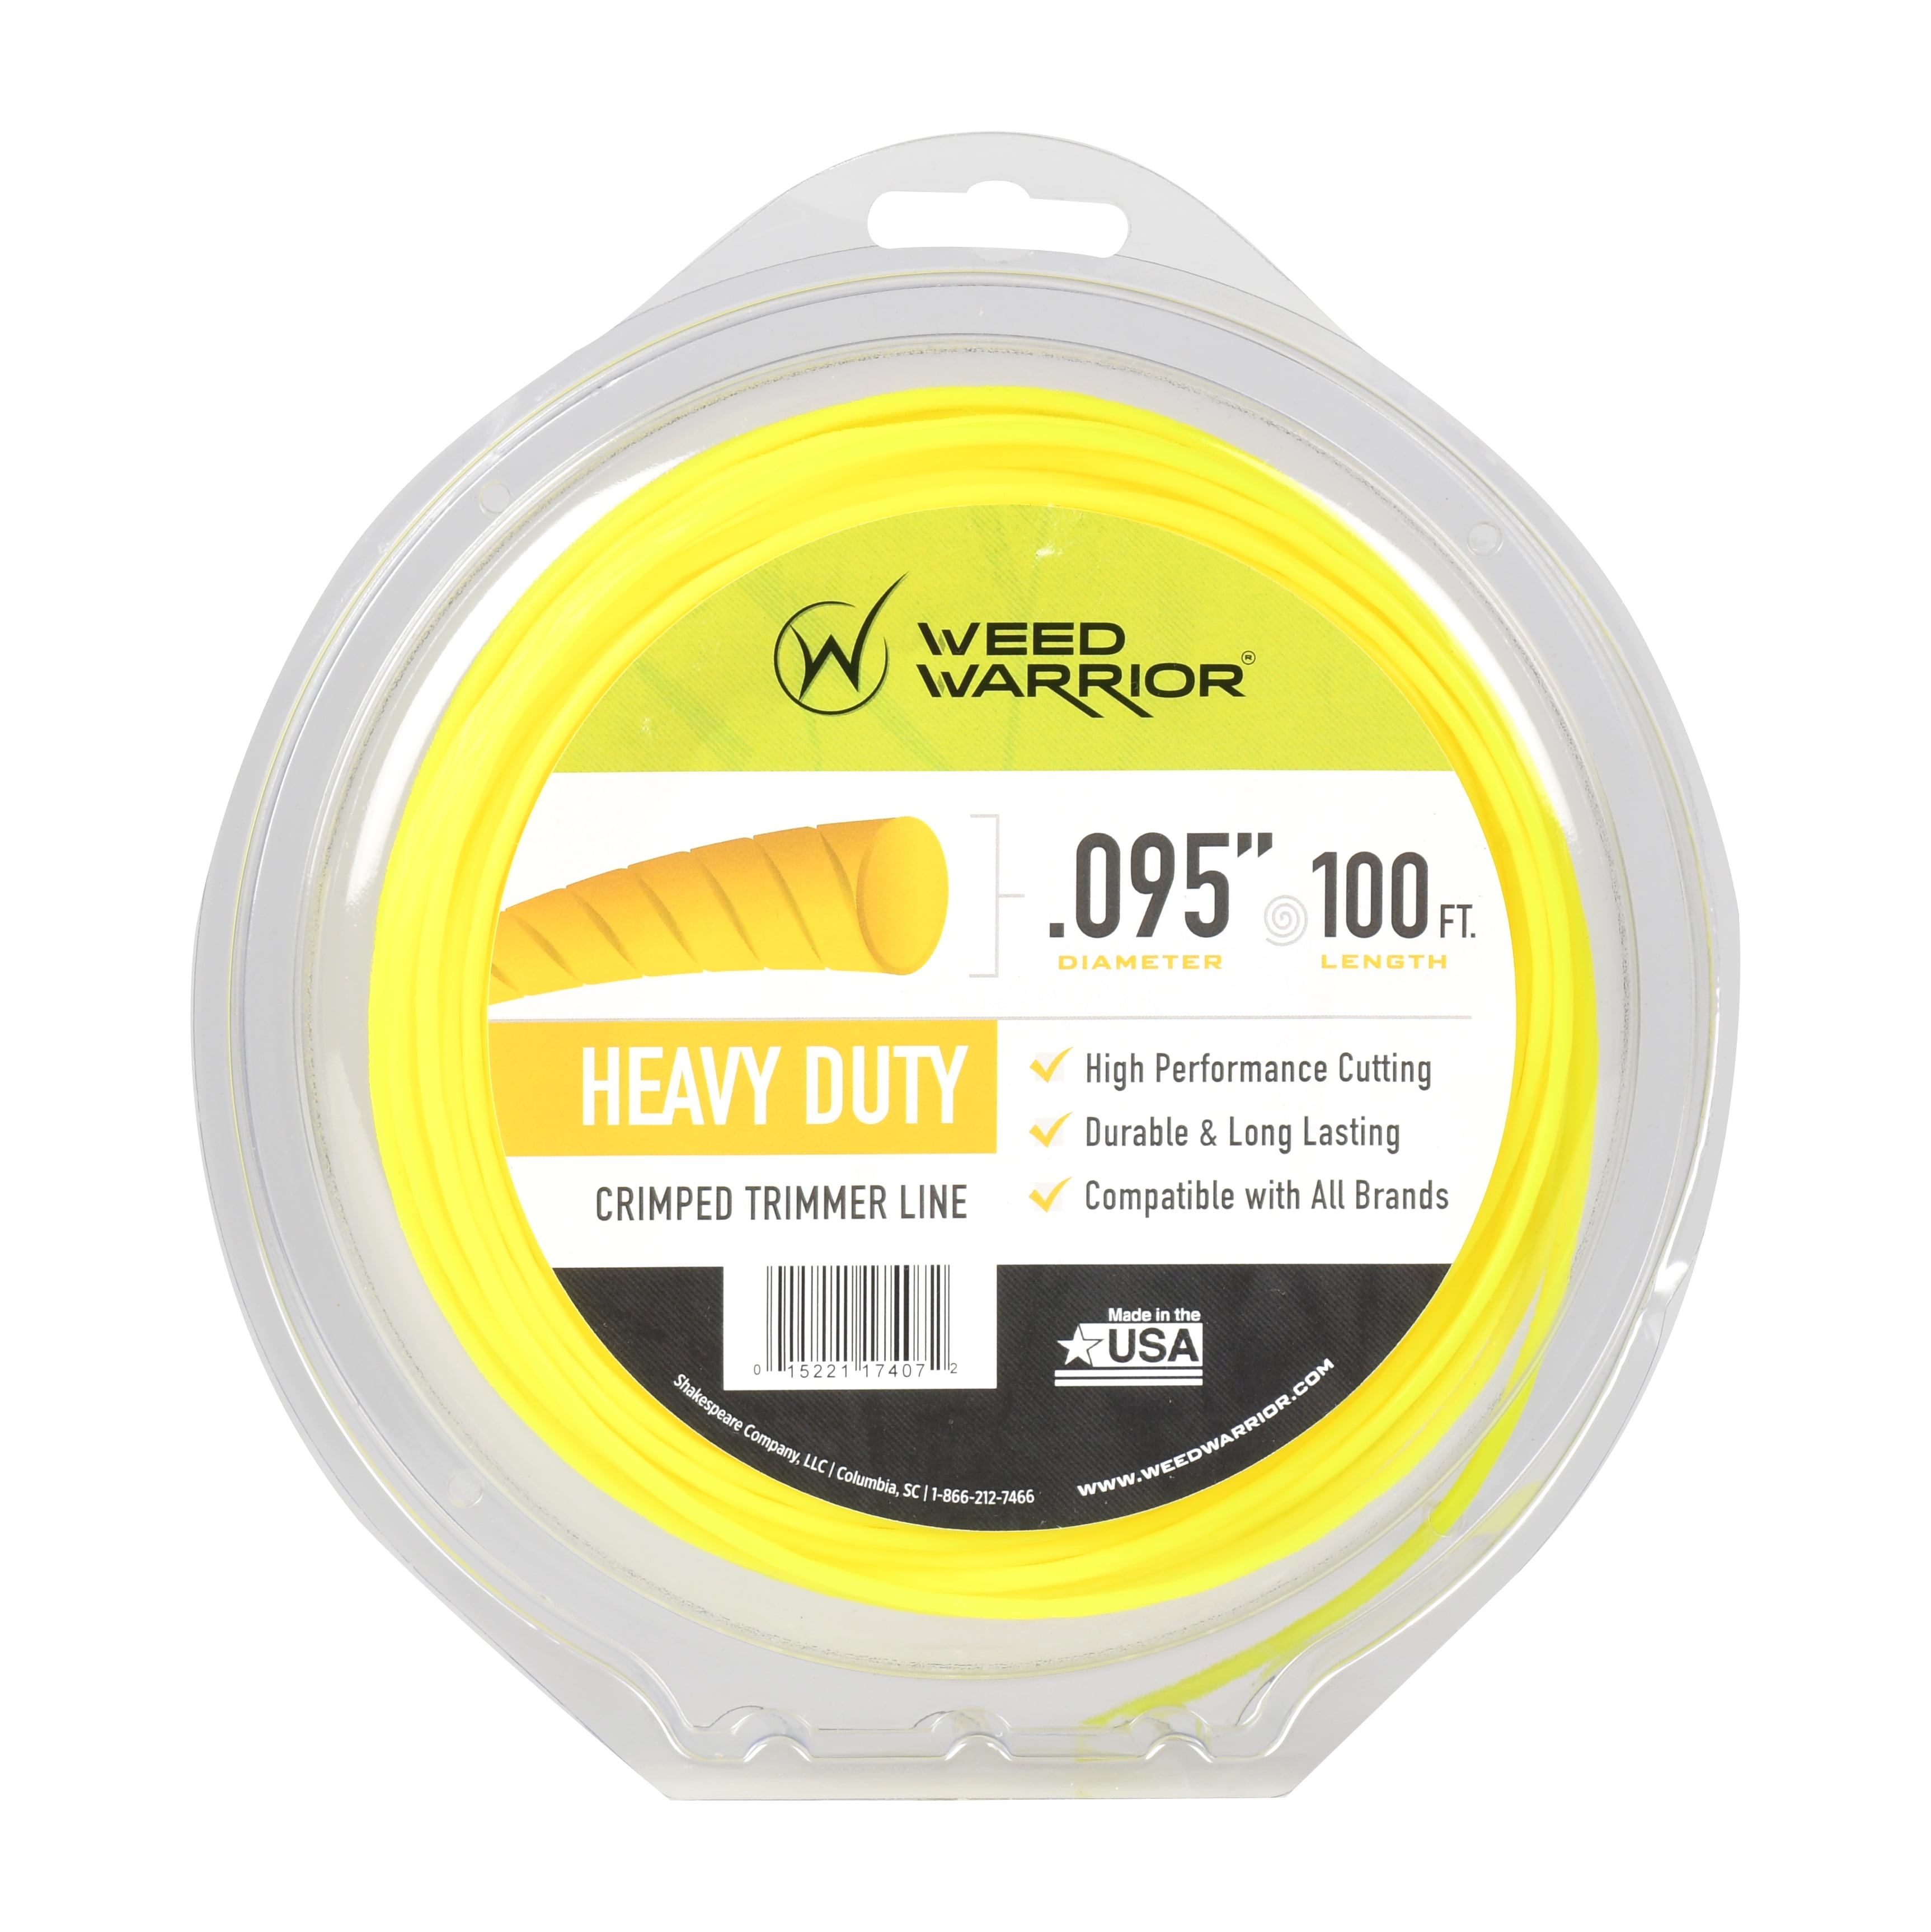 Weed Warrior .095 Heavy Duty Trimmer Line - 100 ft